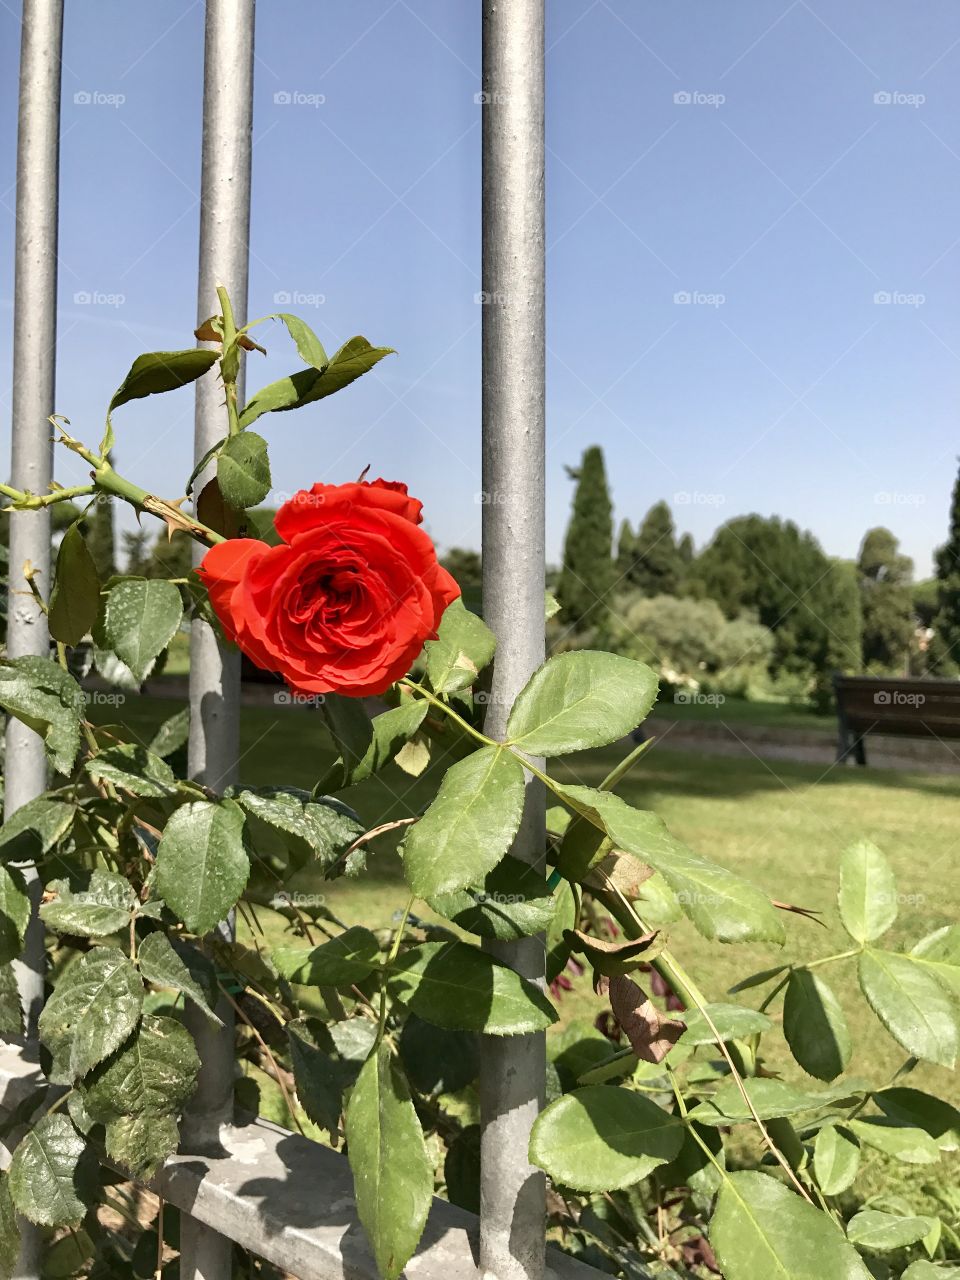 Gorgeous red rose blooming through the gate at the Rome Rose Garden, Rome, Italy